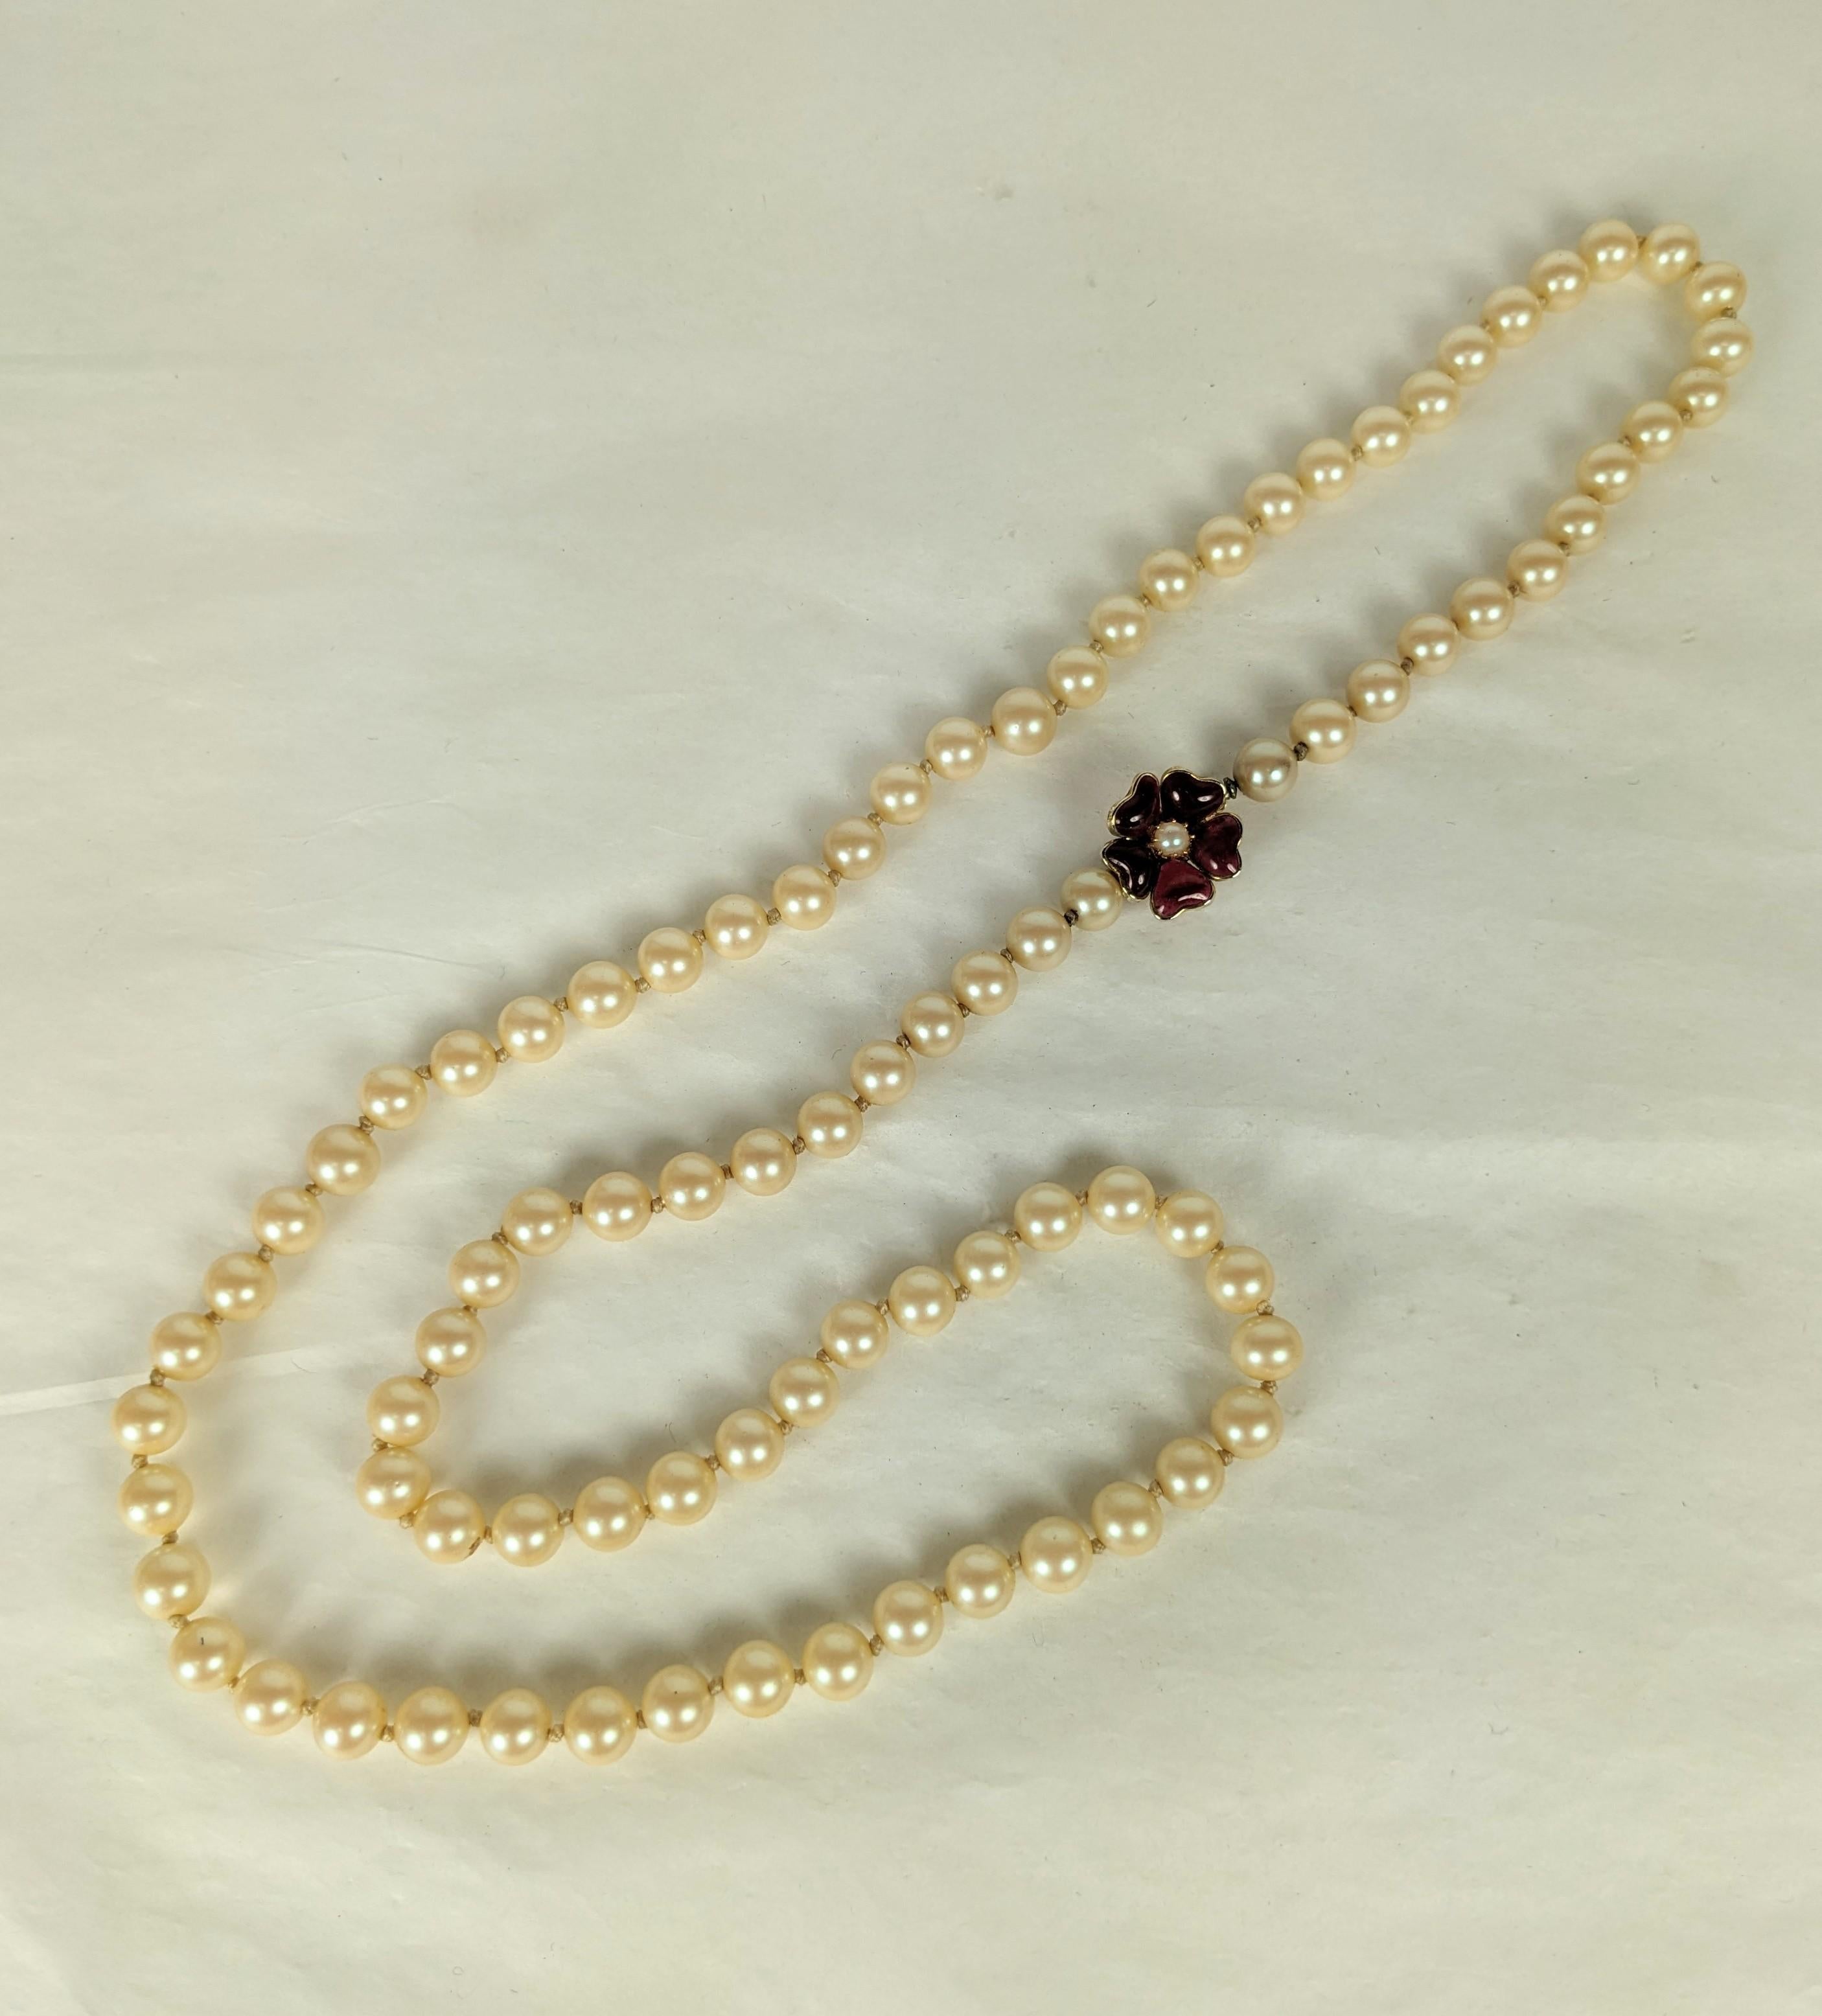 Vogue Faux Pearls with Gripoix Poured Glass Flower Clasp in ruby and faux pearl. Hand knotted. 1950's USA. 29